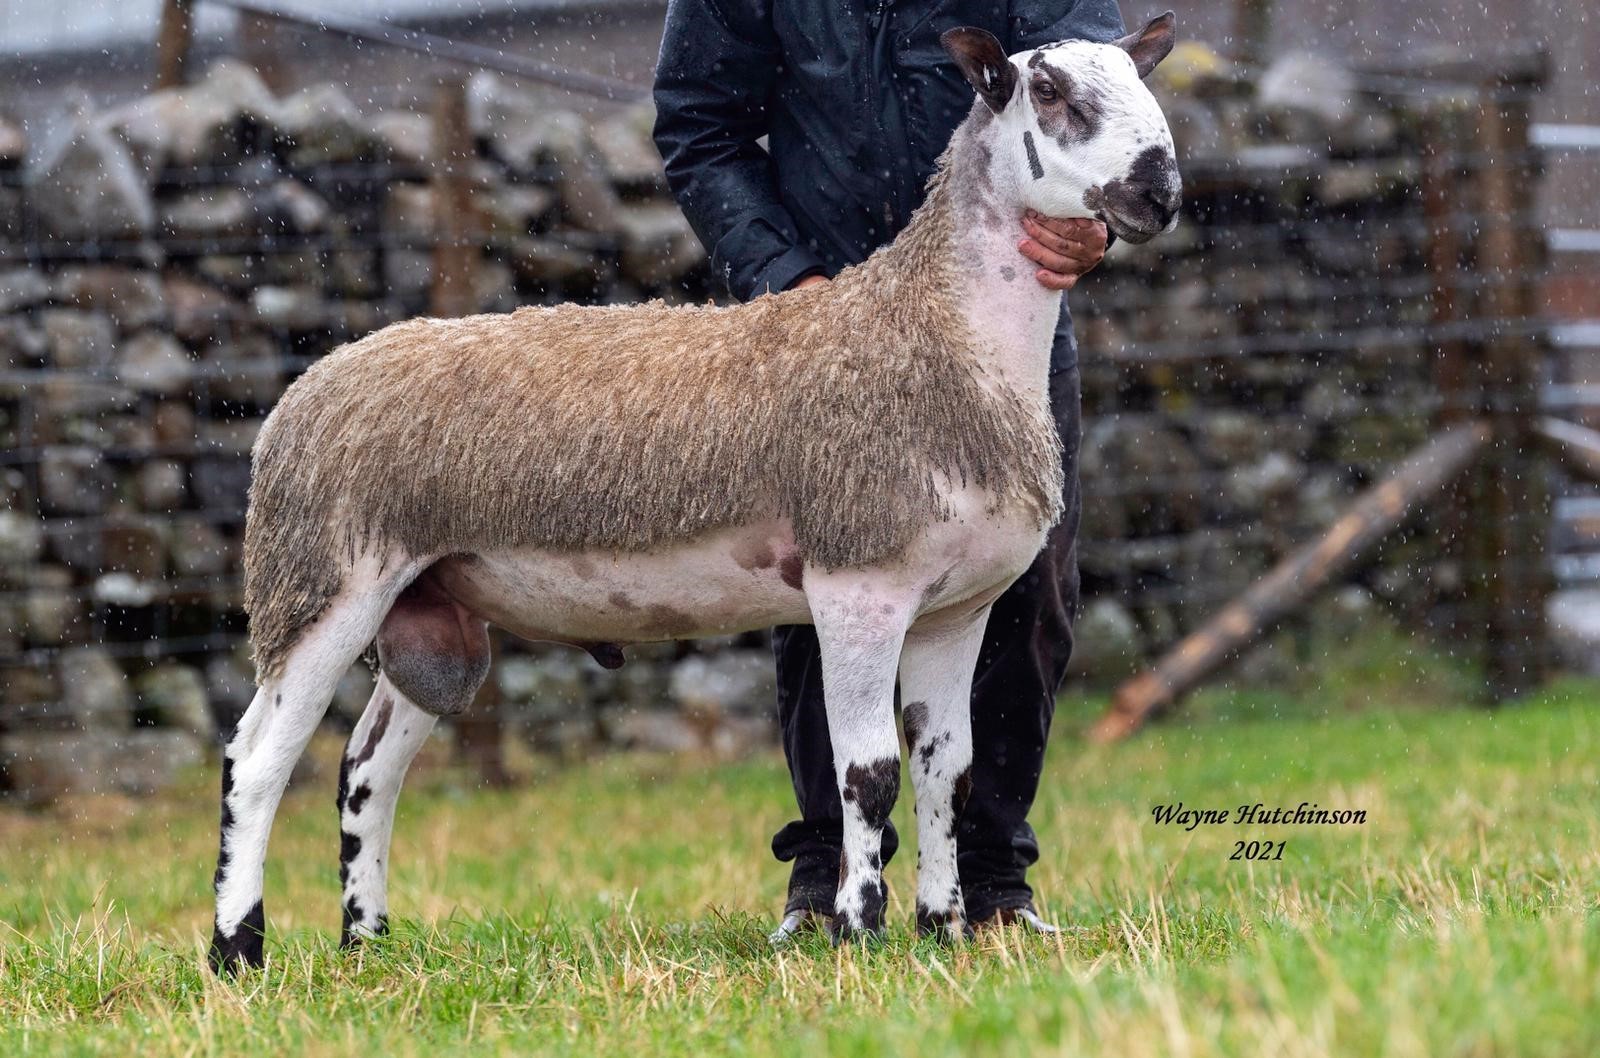 Sold at Hawes from Lord familys Hewgill flock at North Stainmore was this Bluefaced Leicester ram lamb which made £16,000 selling to four Scottish flocks - Farden, Ben Nevis, Dawyck and Macherquhat